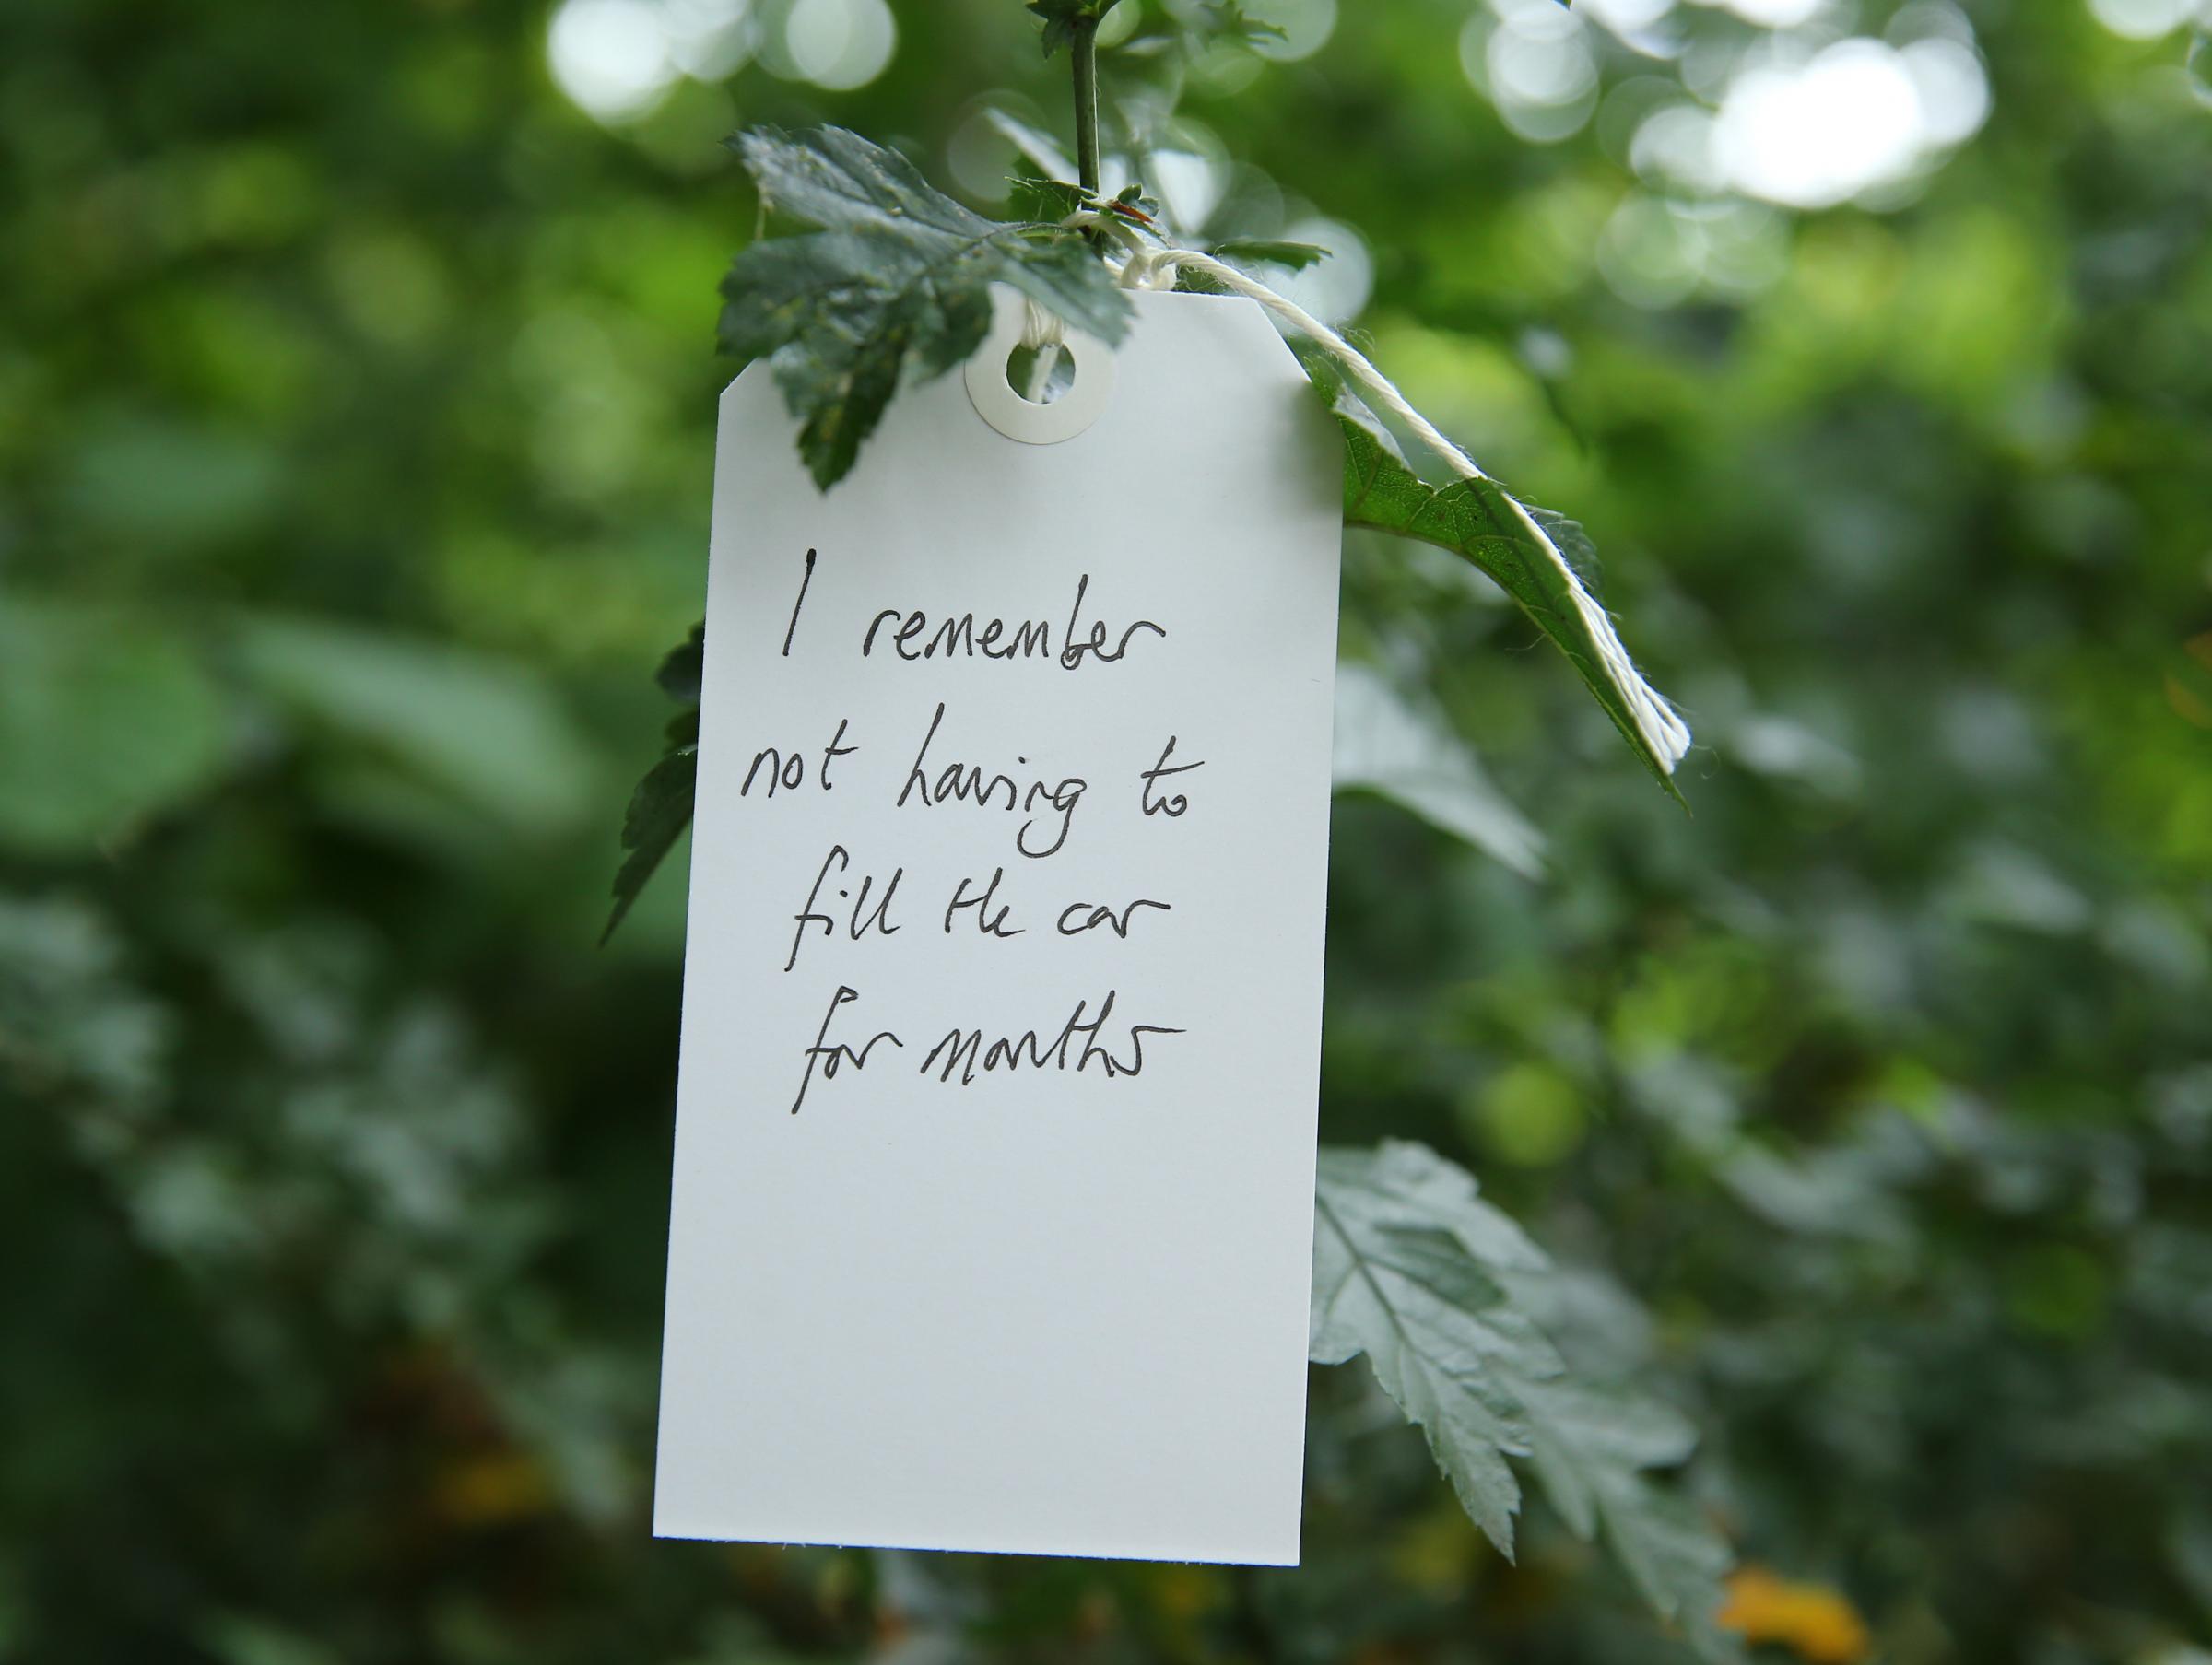 Herald covid memorial campaign, I Remember open day at the Hidden Gardens, Glasgow. Pictured are I Remember sentences tied to trees. Photograph by Colin Mearns.